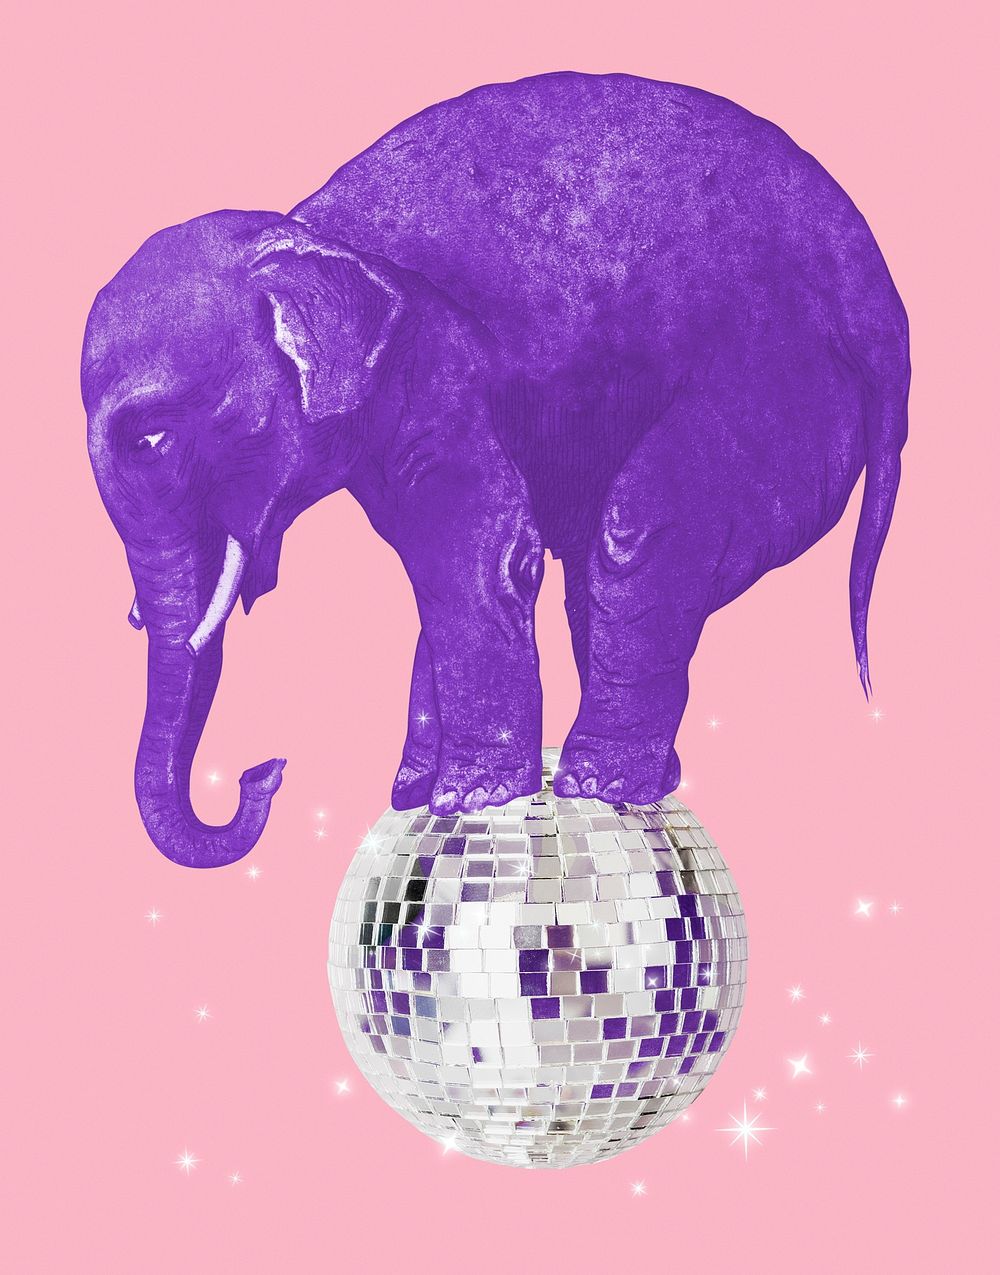 Aesthetic purple elephant on mirror ball psd. Remixed by rawpixel.